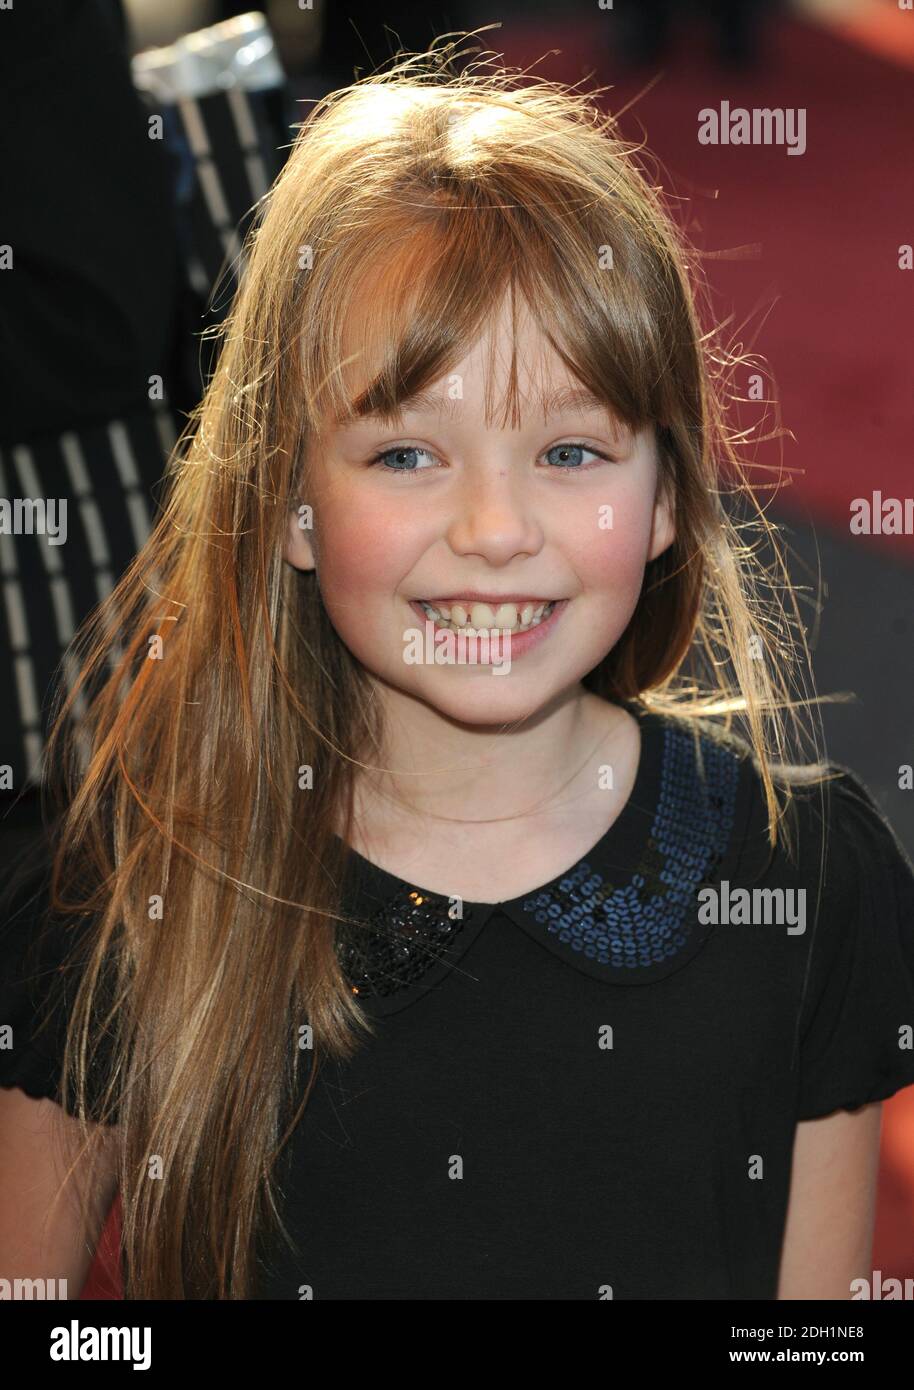 Connie Talbot - Photoshoot this afternoon .. Lots of love